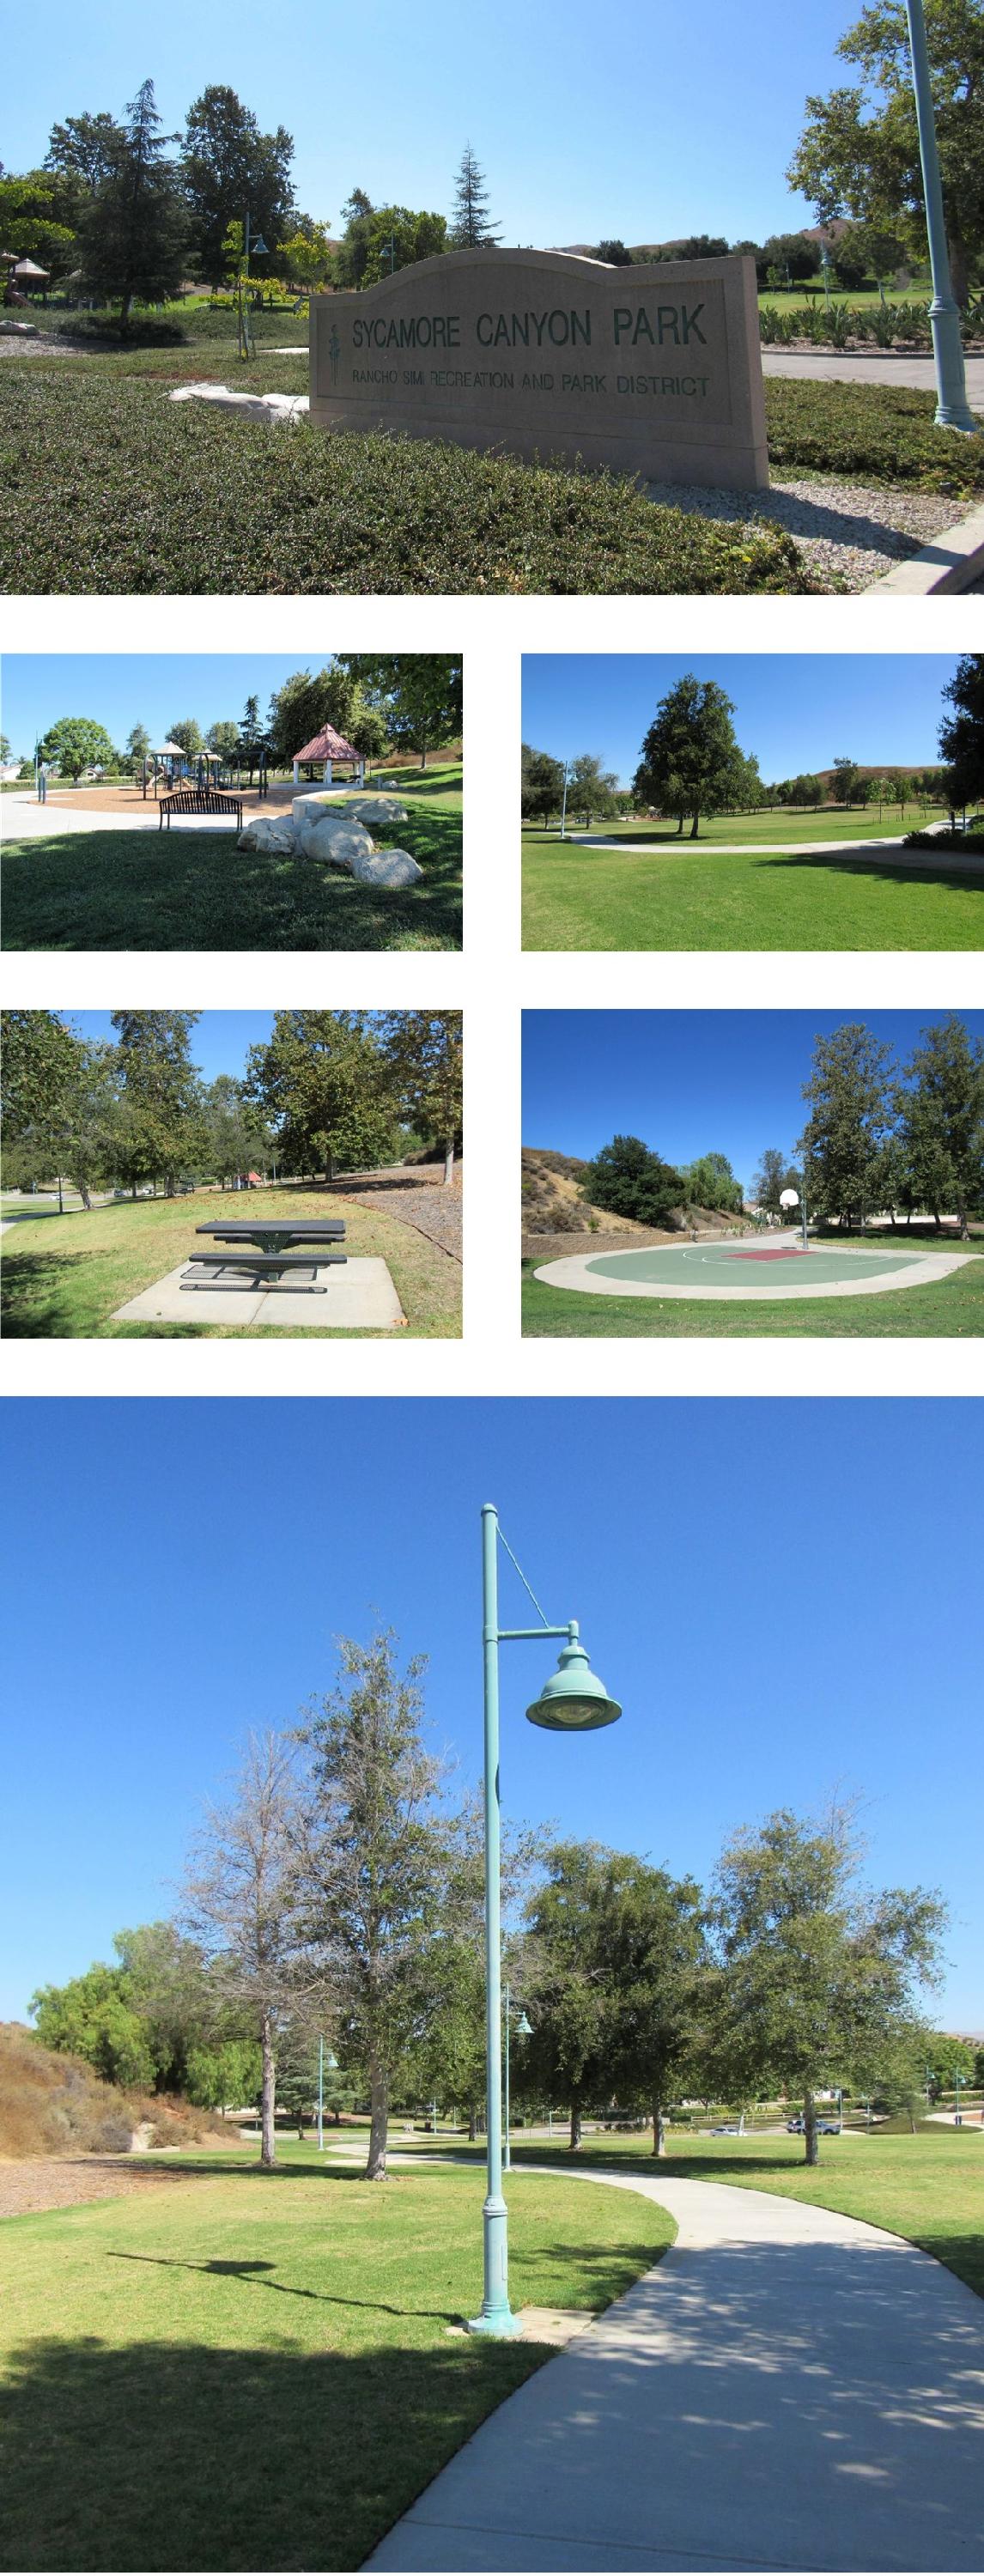 Sycamore Canyon Park Collage